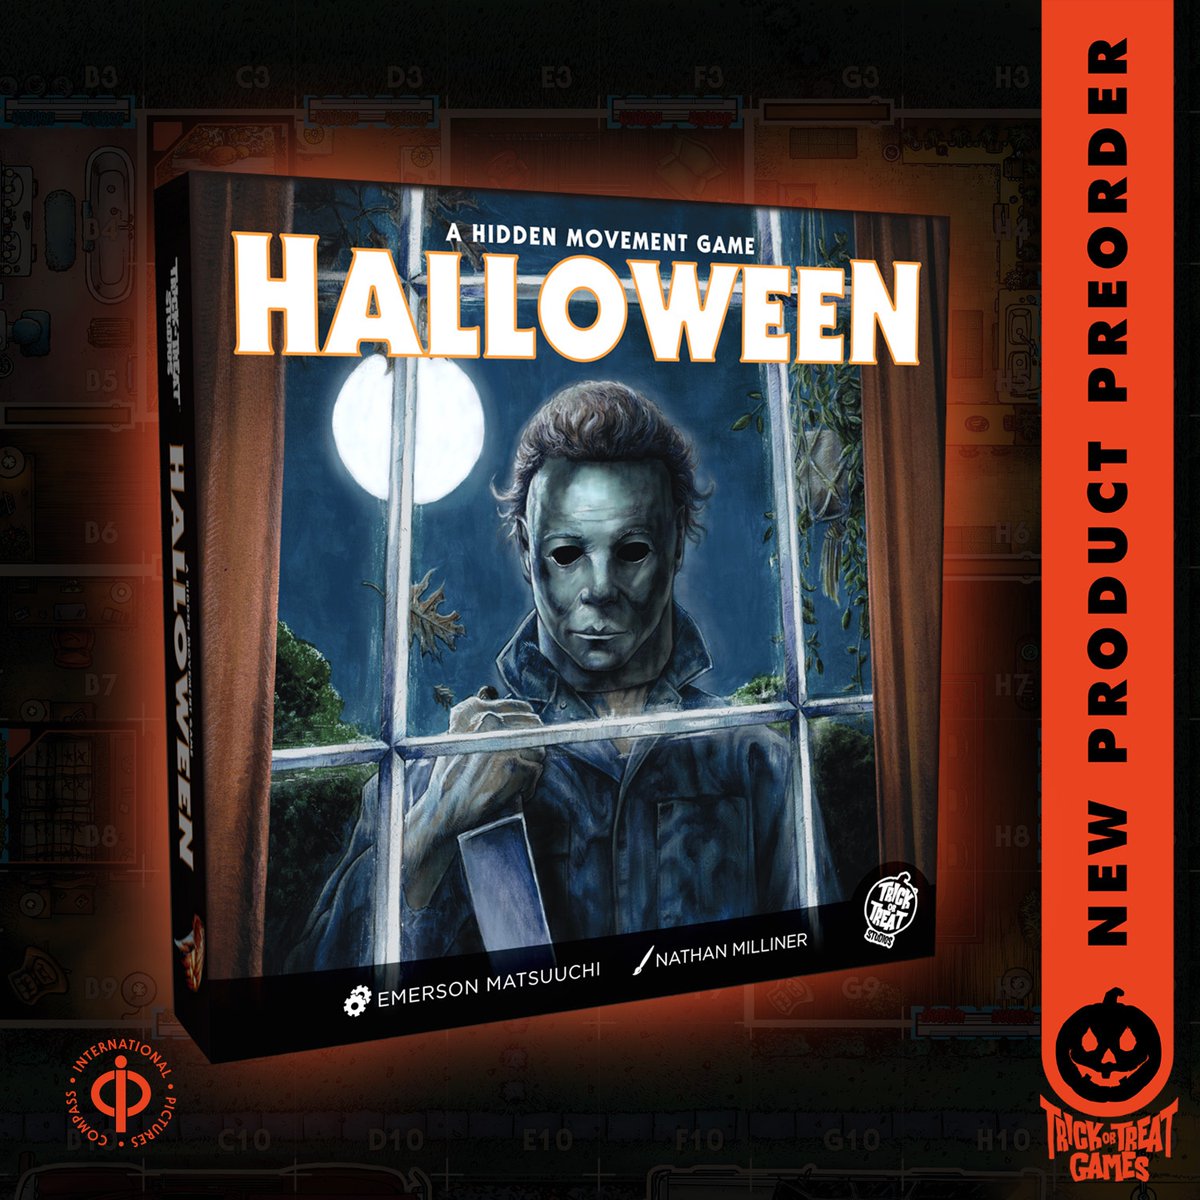 For the first time ever, #Halloween is a tabletop game! Get ready to throw the best horror game night ever with this fun-to-play hidden movement game!

Pre-Order: bit.ly/3oCffEe

It was the night HE came home... and one player must take on the role of Michael Myers!